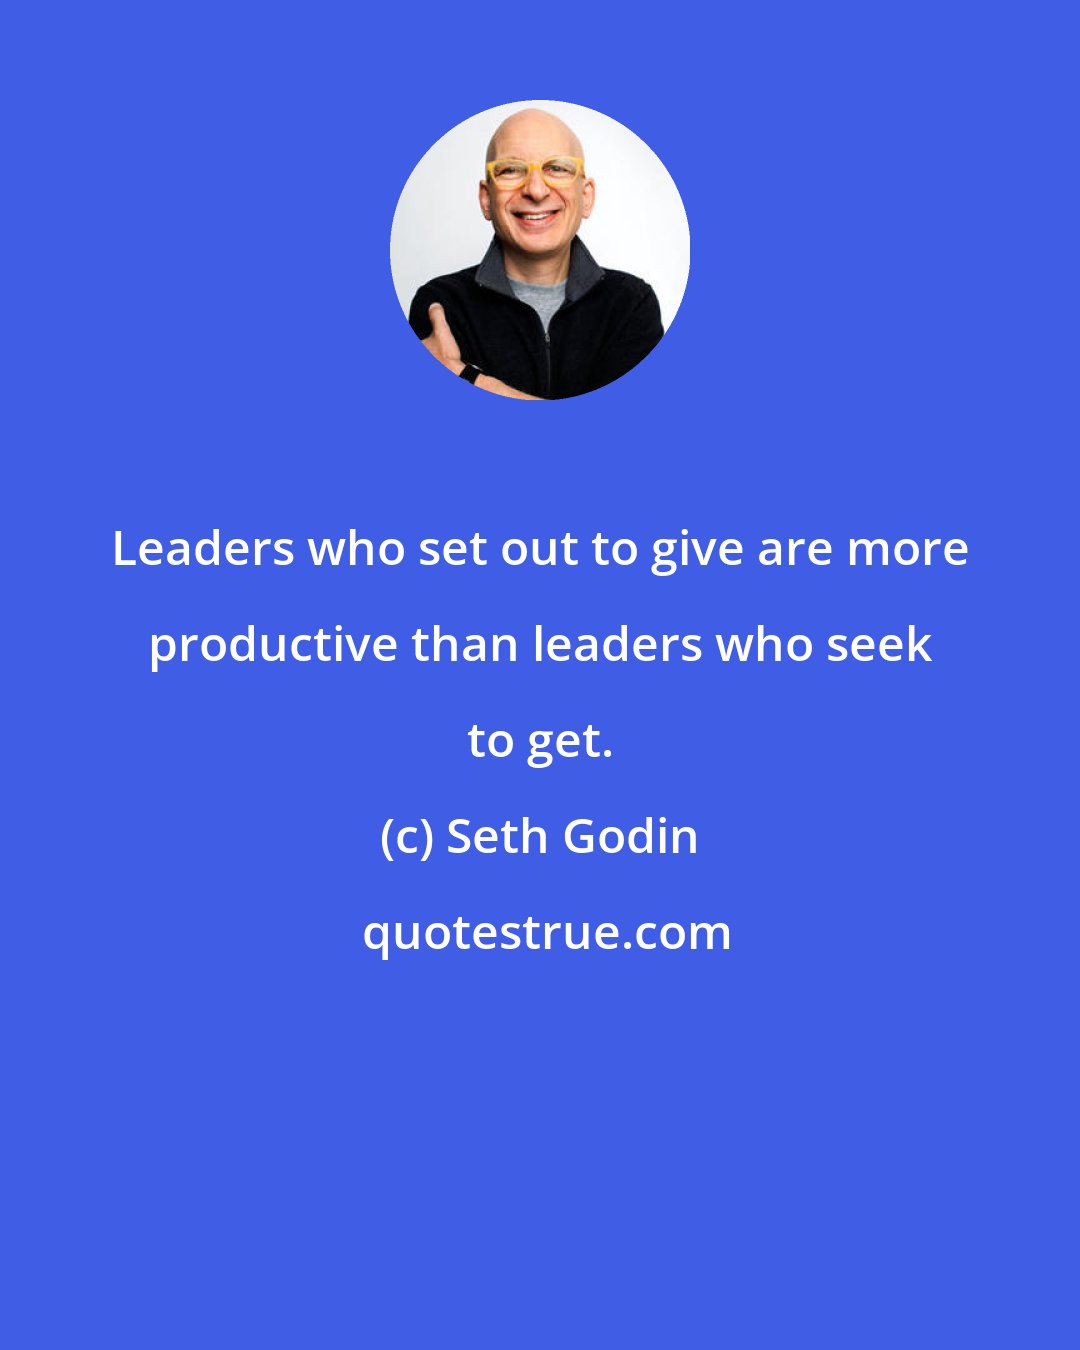 Seth Godin: Leaders who set out to give are more productive than leaders who seek to get.